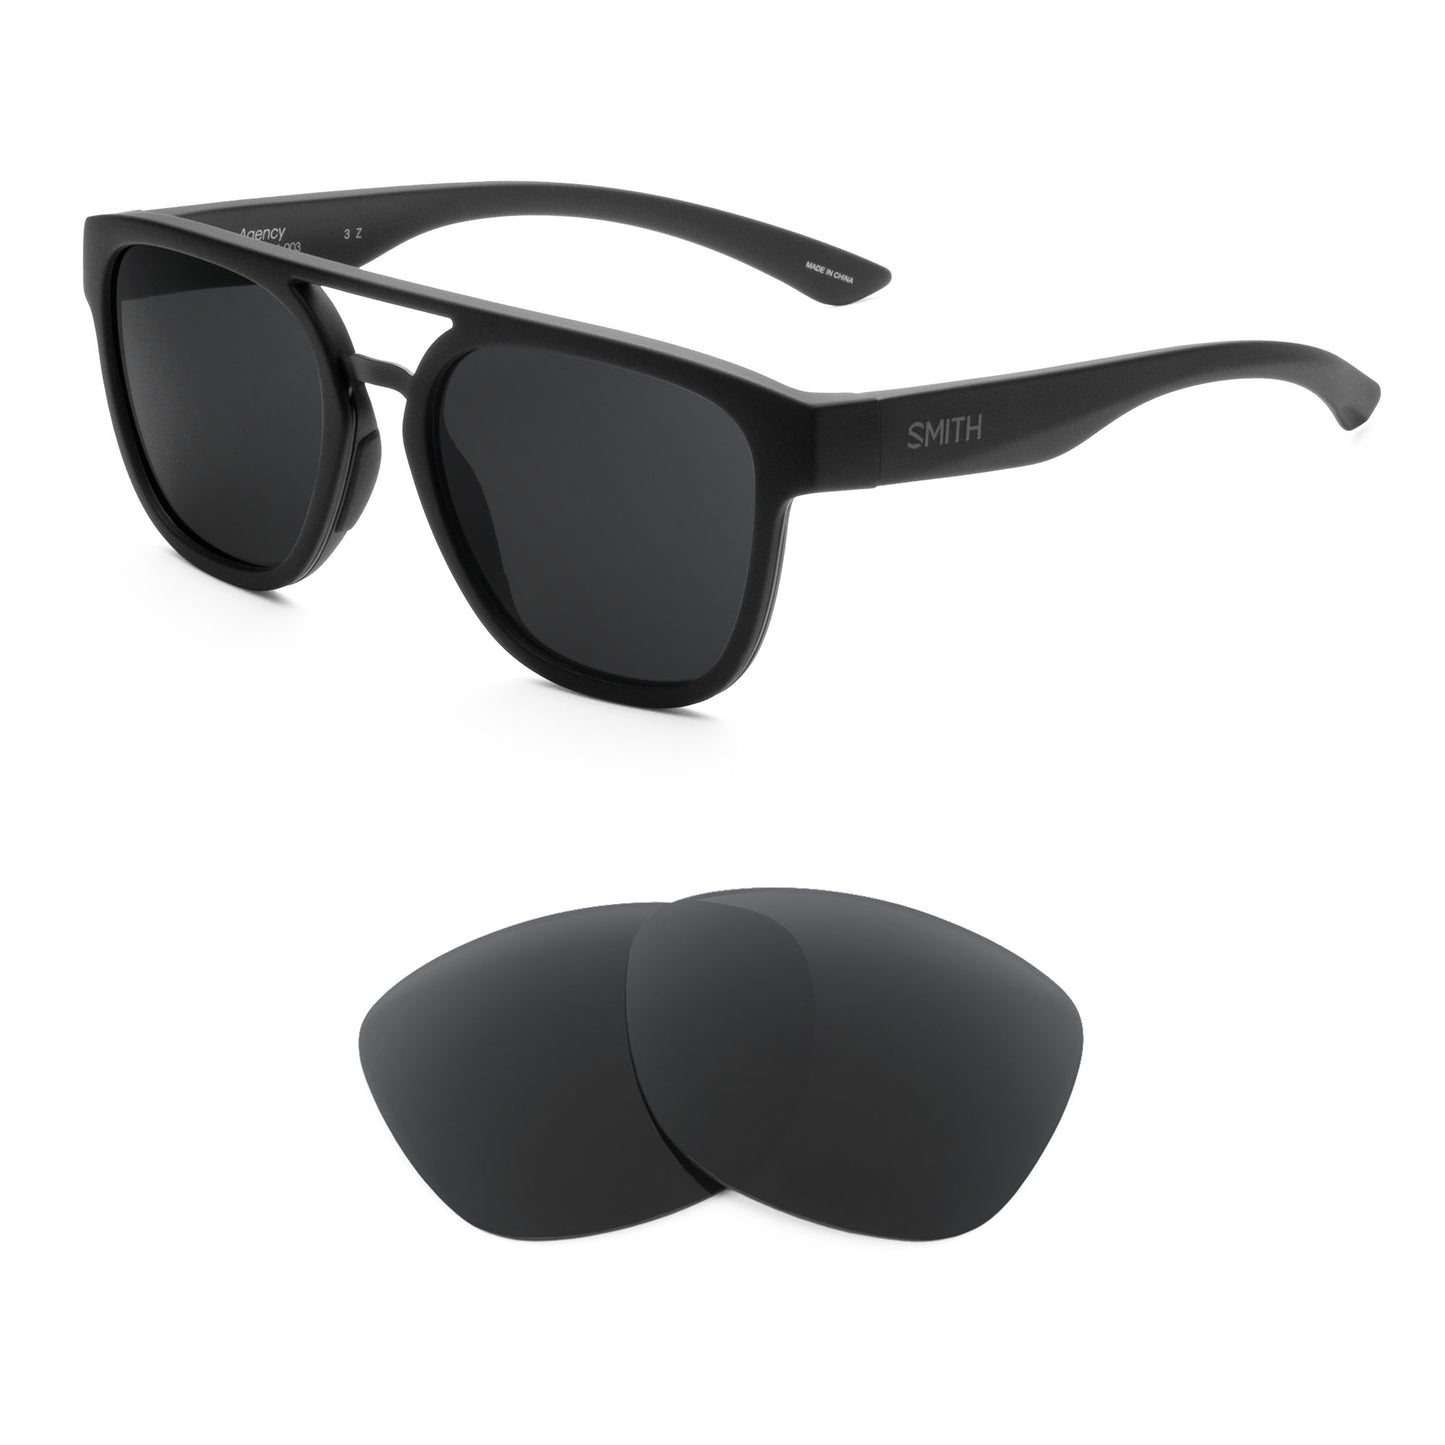 Smith Agency sunglasses with replacement lenses